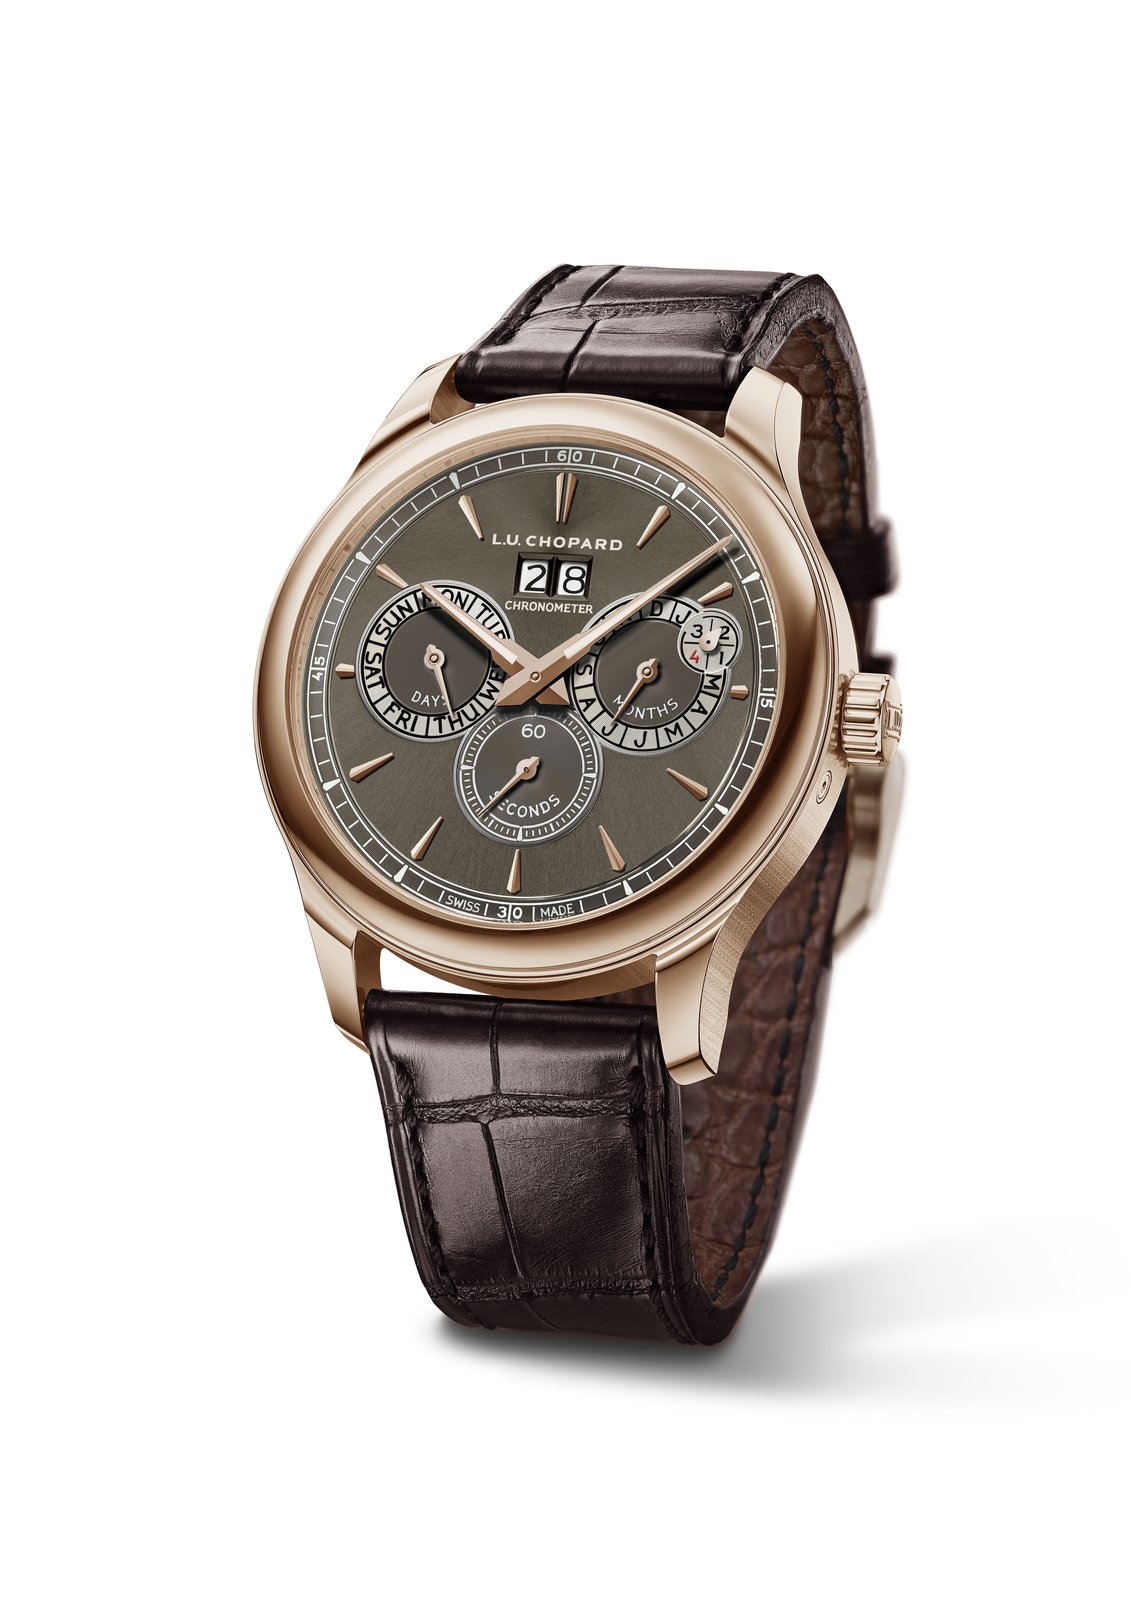 L.U.C Perpetual Twin Automatic Perpetual Calendar 43mm Stainless Steel and  Nubuck Watch, Ref. No. 168561-3003